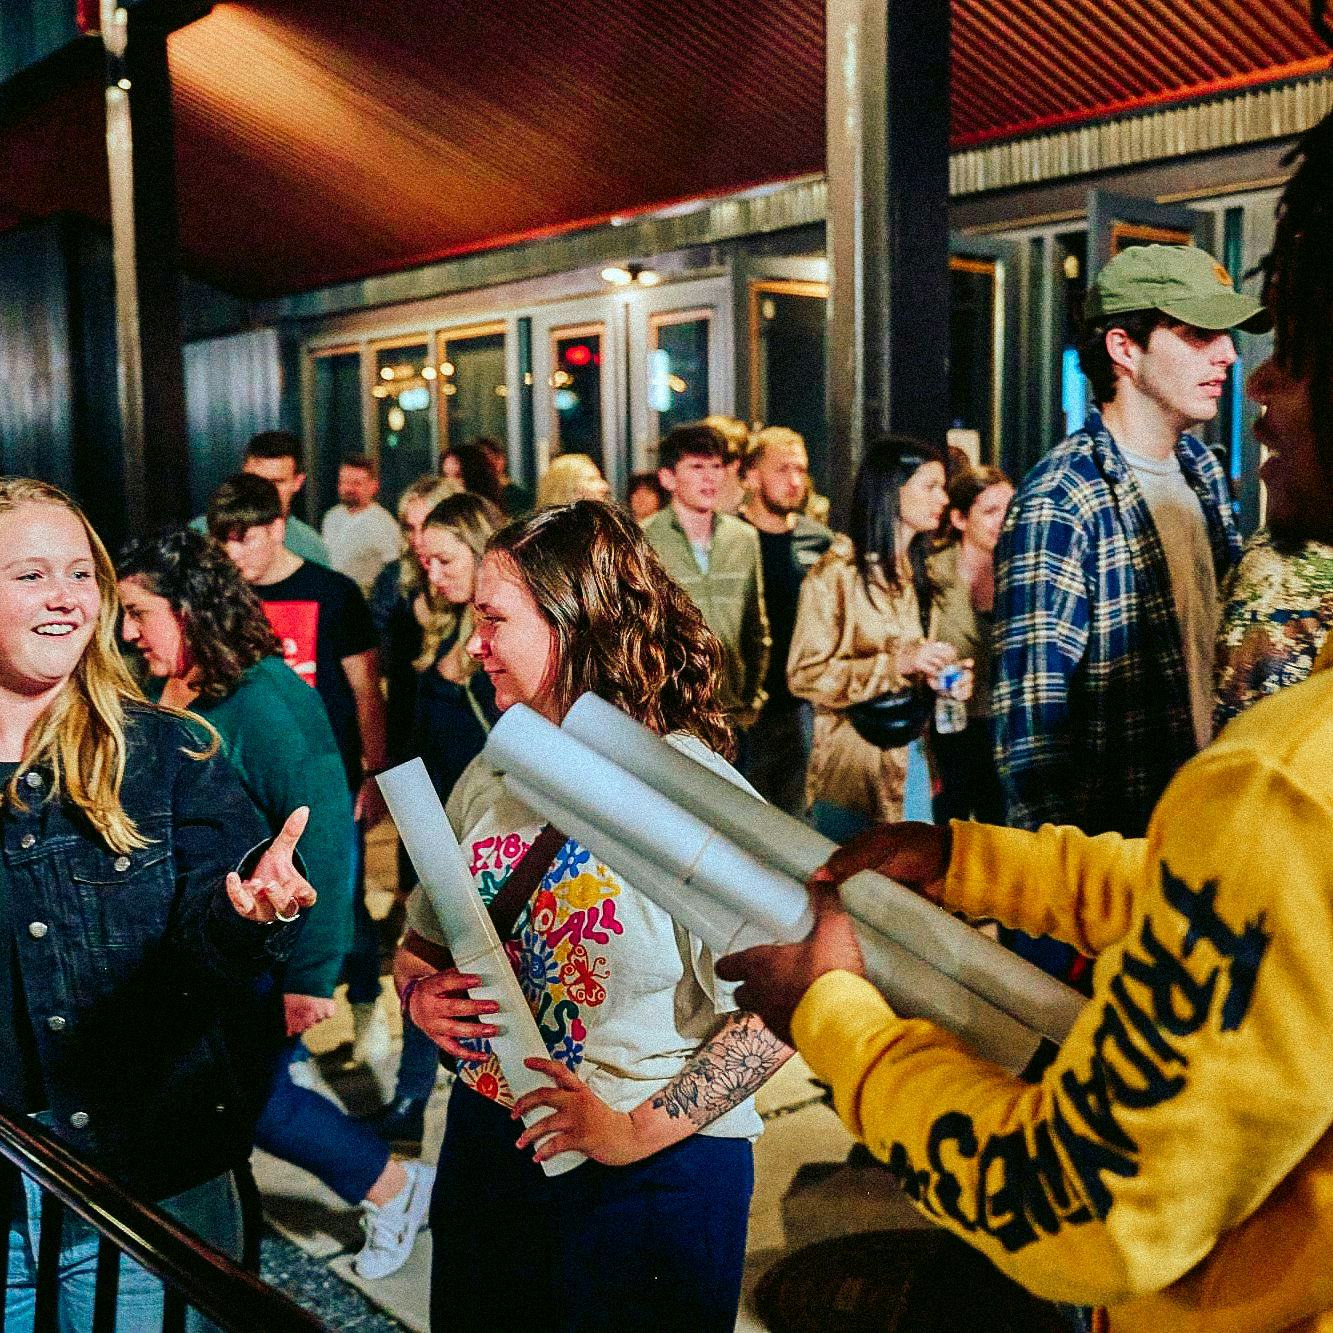 man passing out posters to fans after the concert